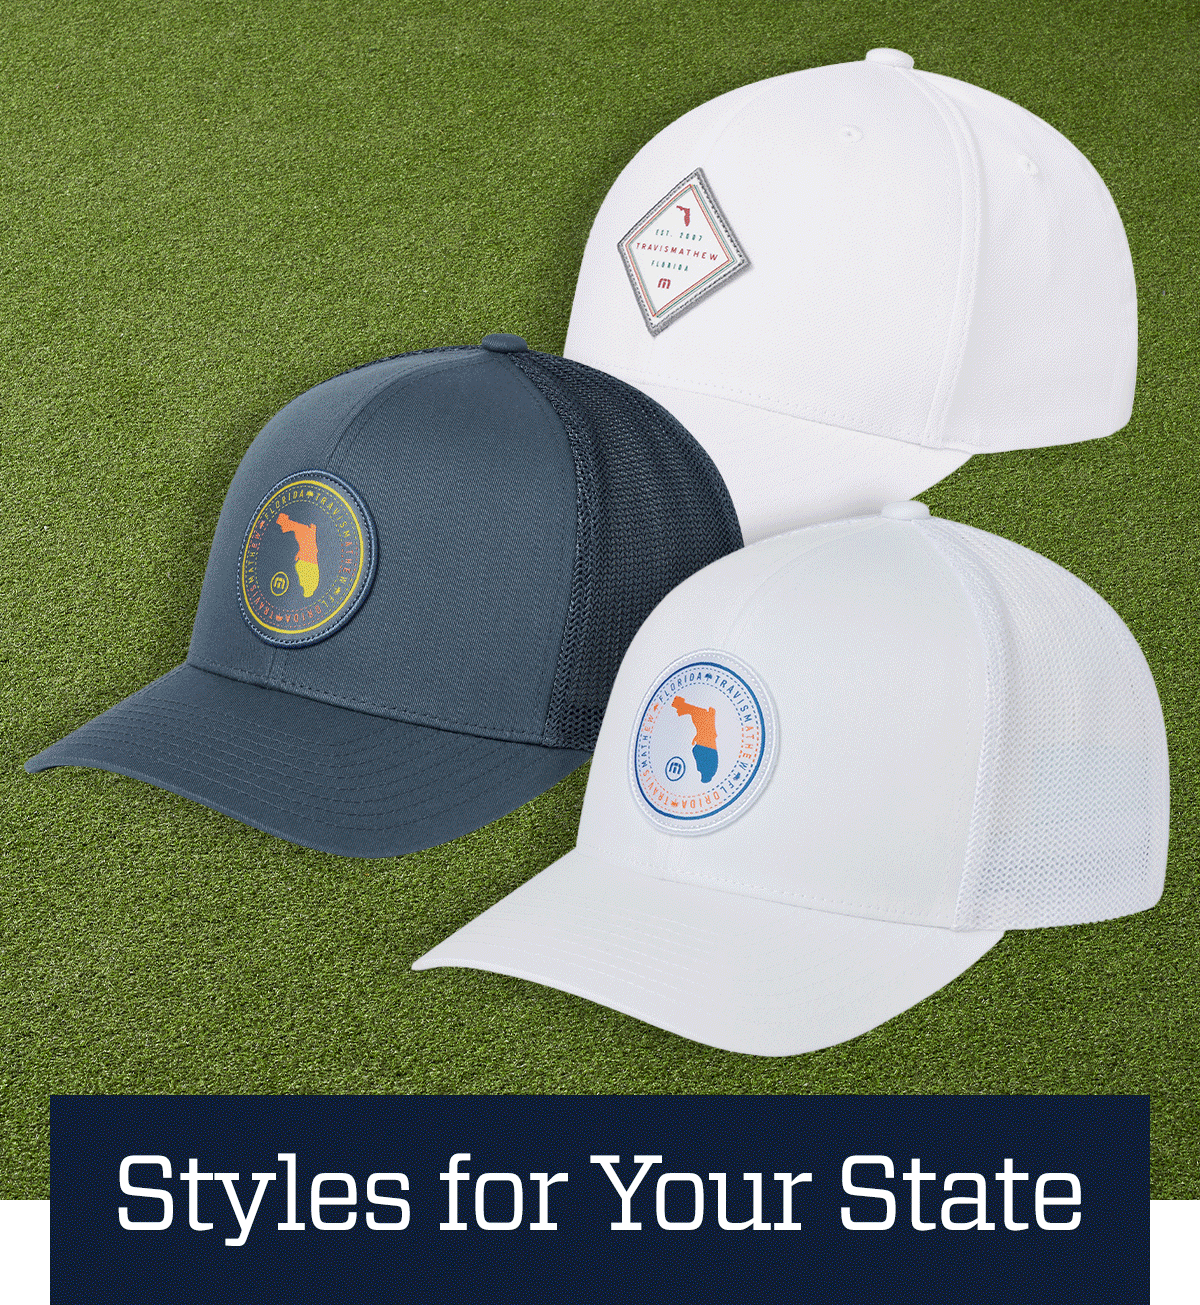 Styles for your state.